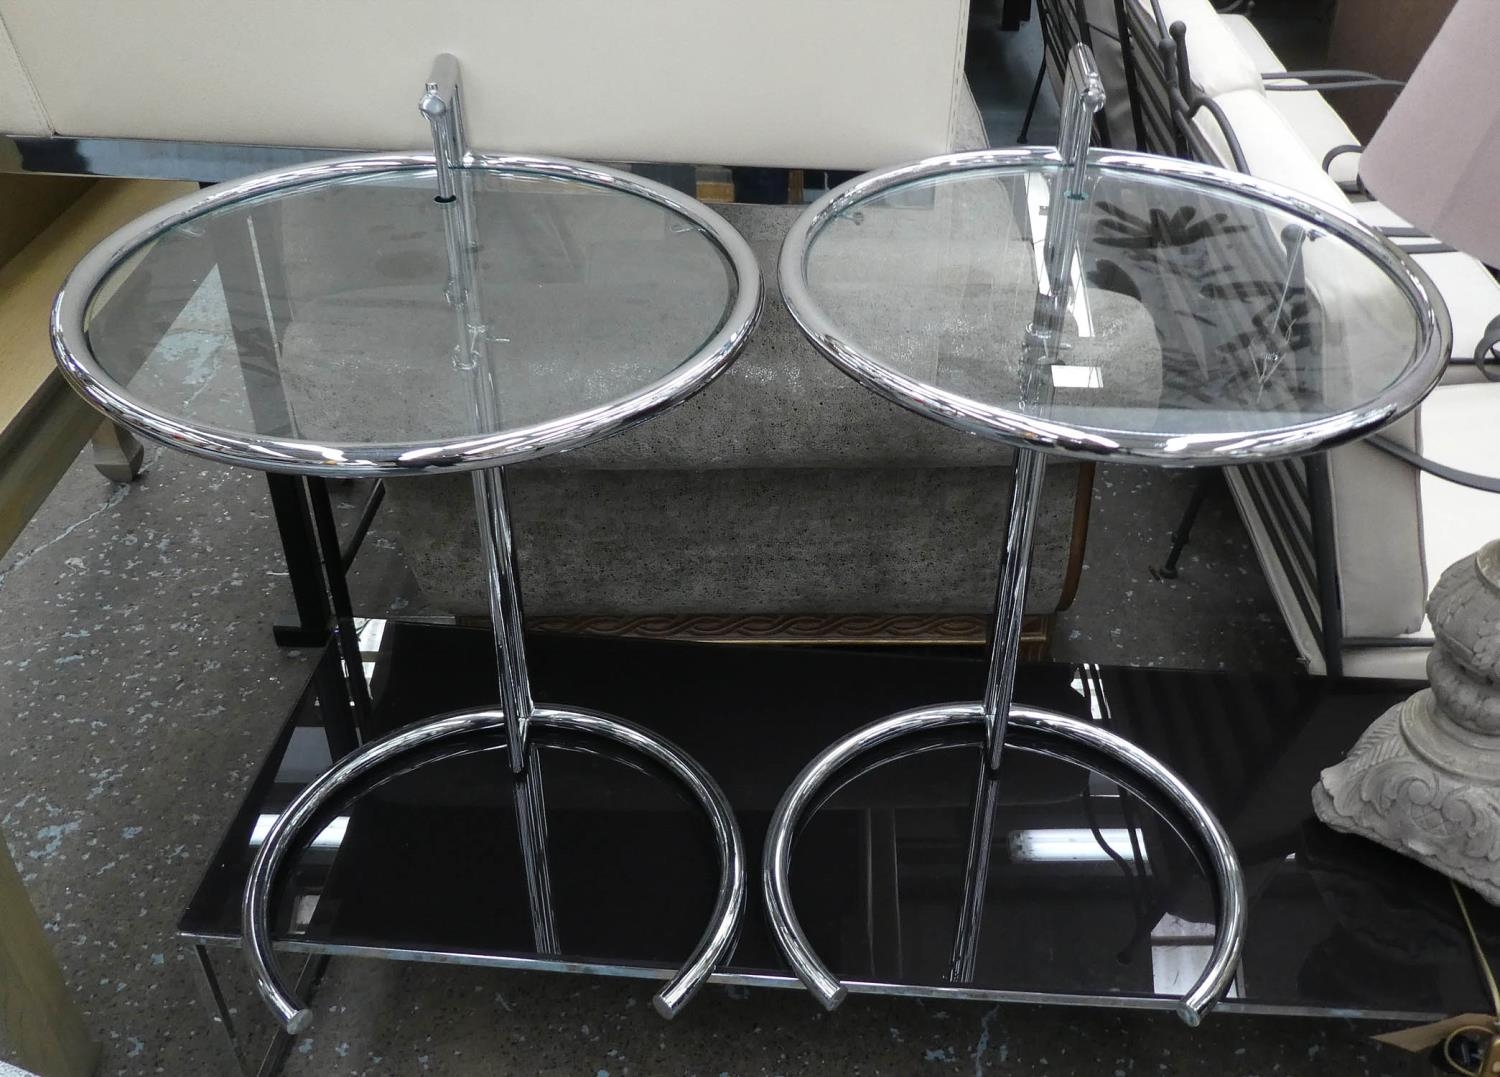 AFTER EILEEN GRAY E1027 STYLE SIDE TABLES, a set of three, 77cm H x 51cm diam at tallest. (3)